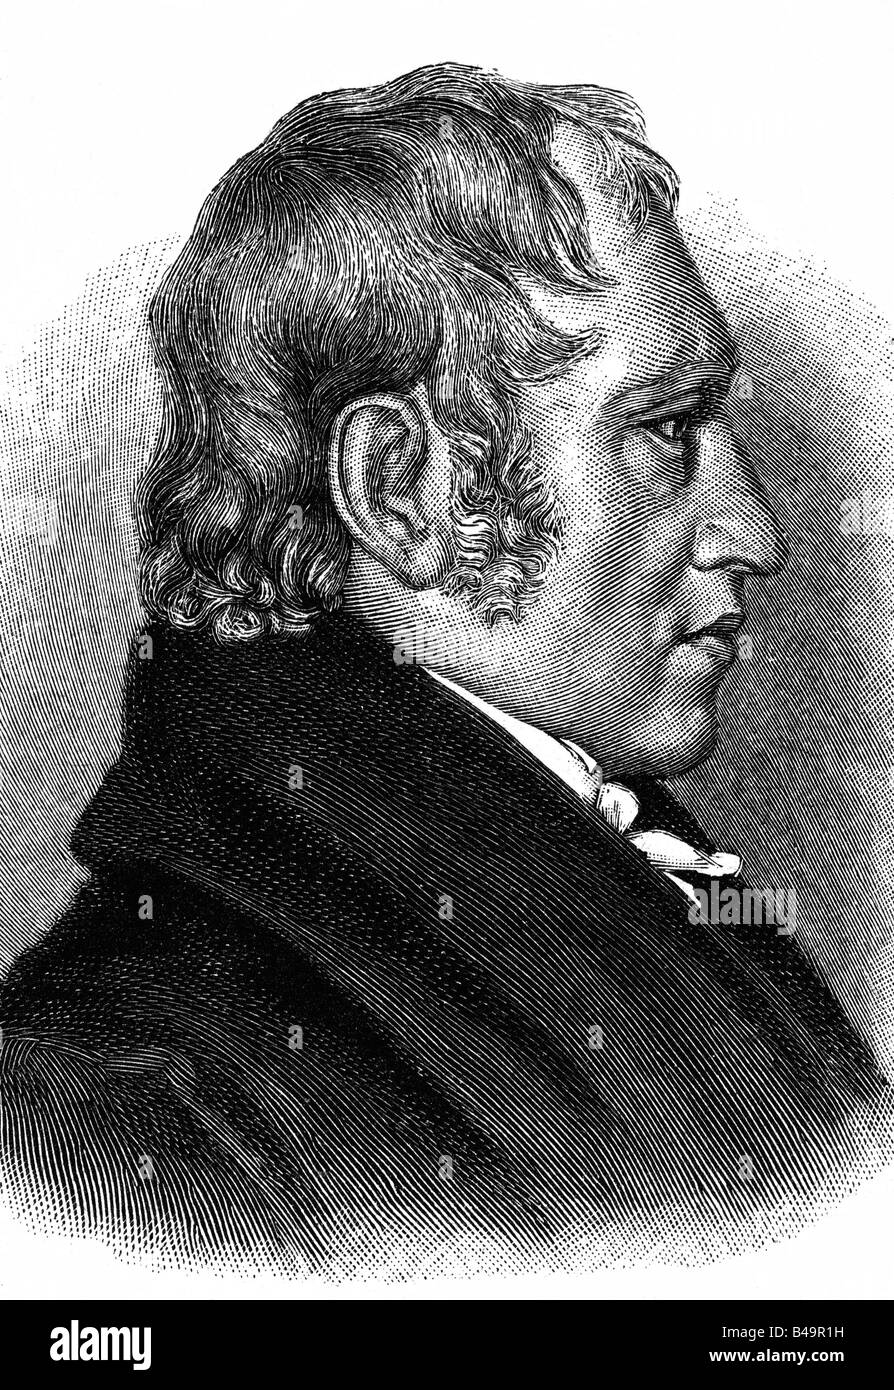 Hegel, Georg Wilhelm Friedrich, 27.8.1770 - 14.11.1831, German philosopher, author, profile, engraving, after engraving by Karl Johann Barth (1787 - 1853) and relief by Friedrich Johann Heinrich Drake (1805 - 1882), 19th century, , Artist's Copyright has not to be cleared Stock Photo